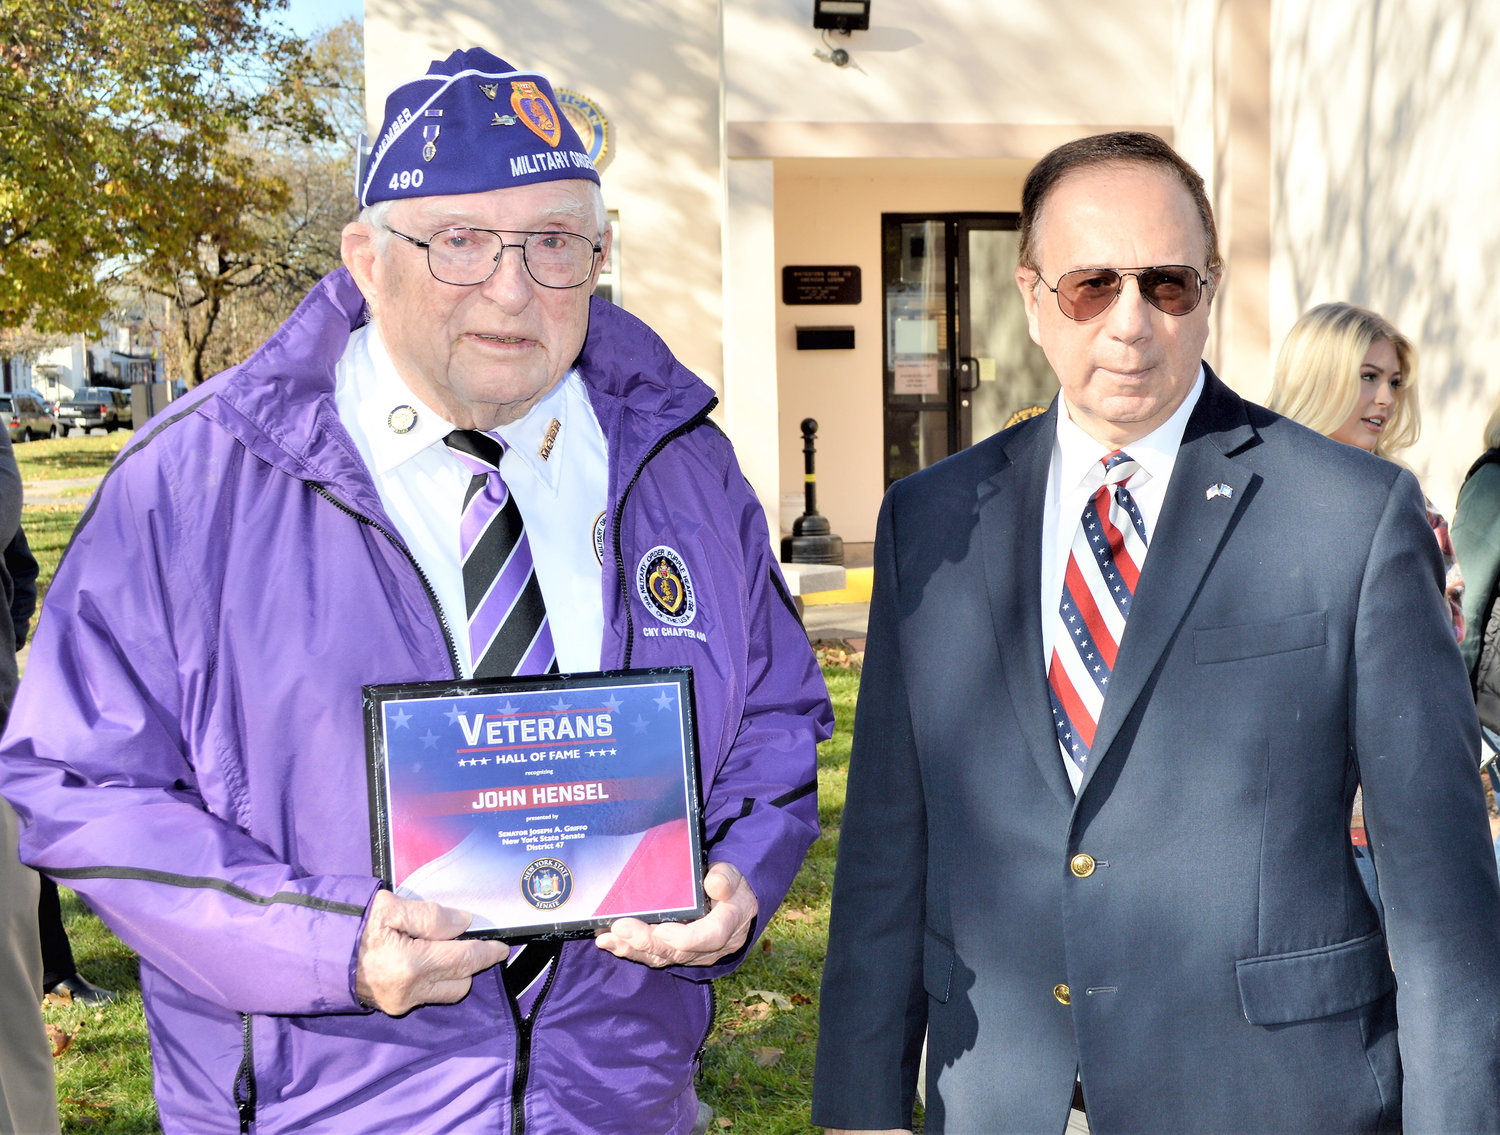 INDUCTED — John “Jack” Hensel, left, a Whitesboro resident and World War II veteran, receives a plaque from State Sen. Joseph A. Griffo, R-47, Rome, to commemorate Hensel’s  induction into the New York State Senate Veterans’ Hall of Fame. The Hall of Fame was created to honor and recognize outstanding veterans from New York State who have distinguished themselves both in military and civilian life.